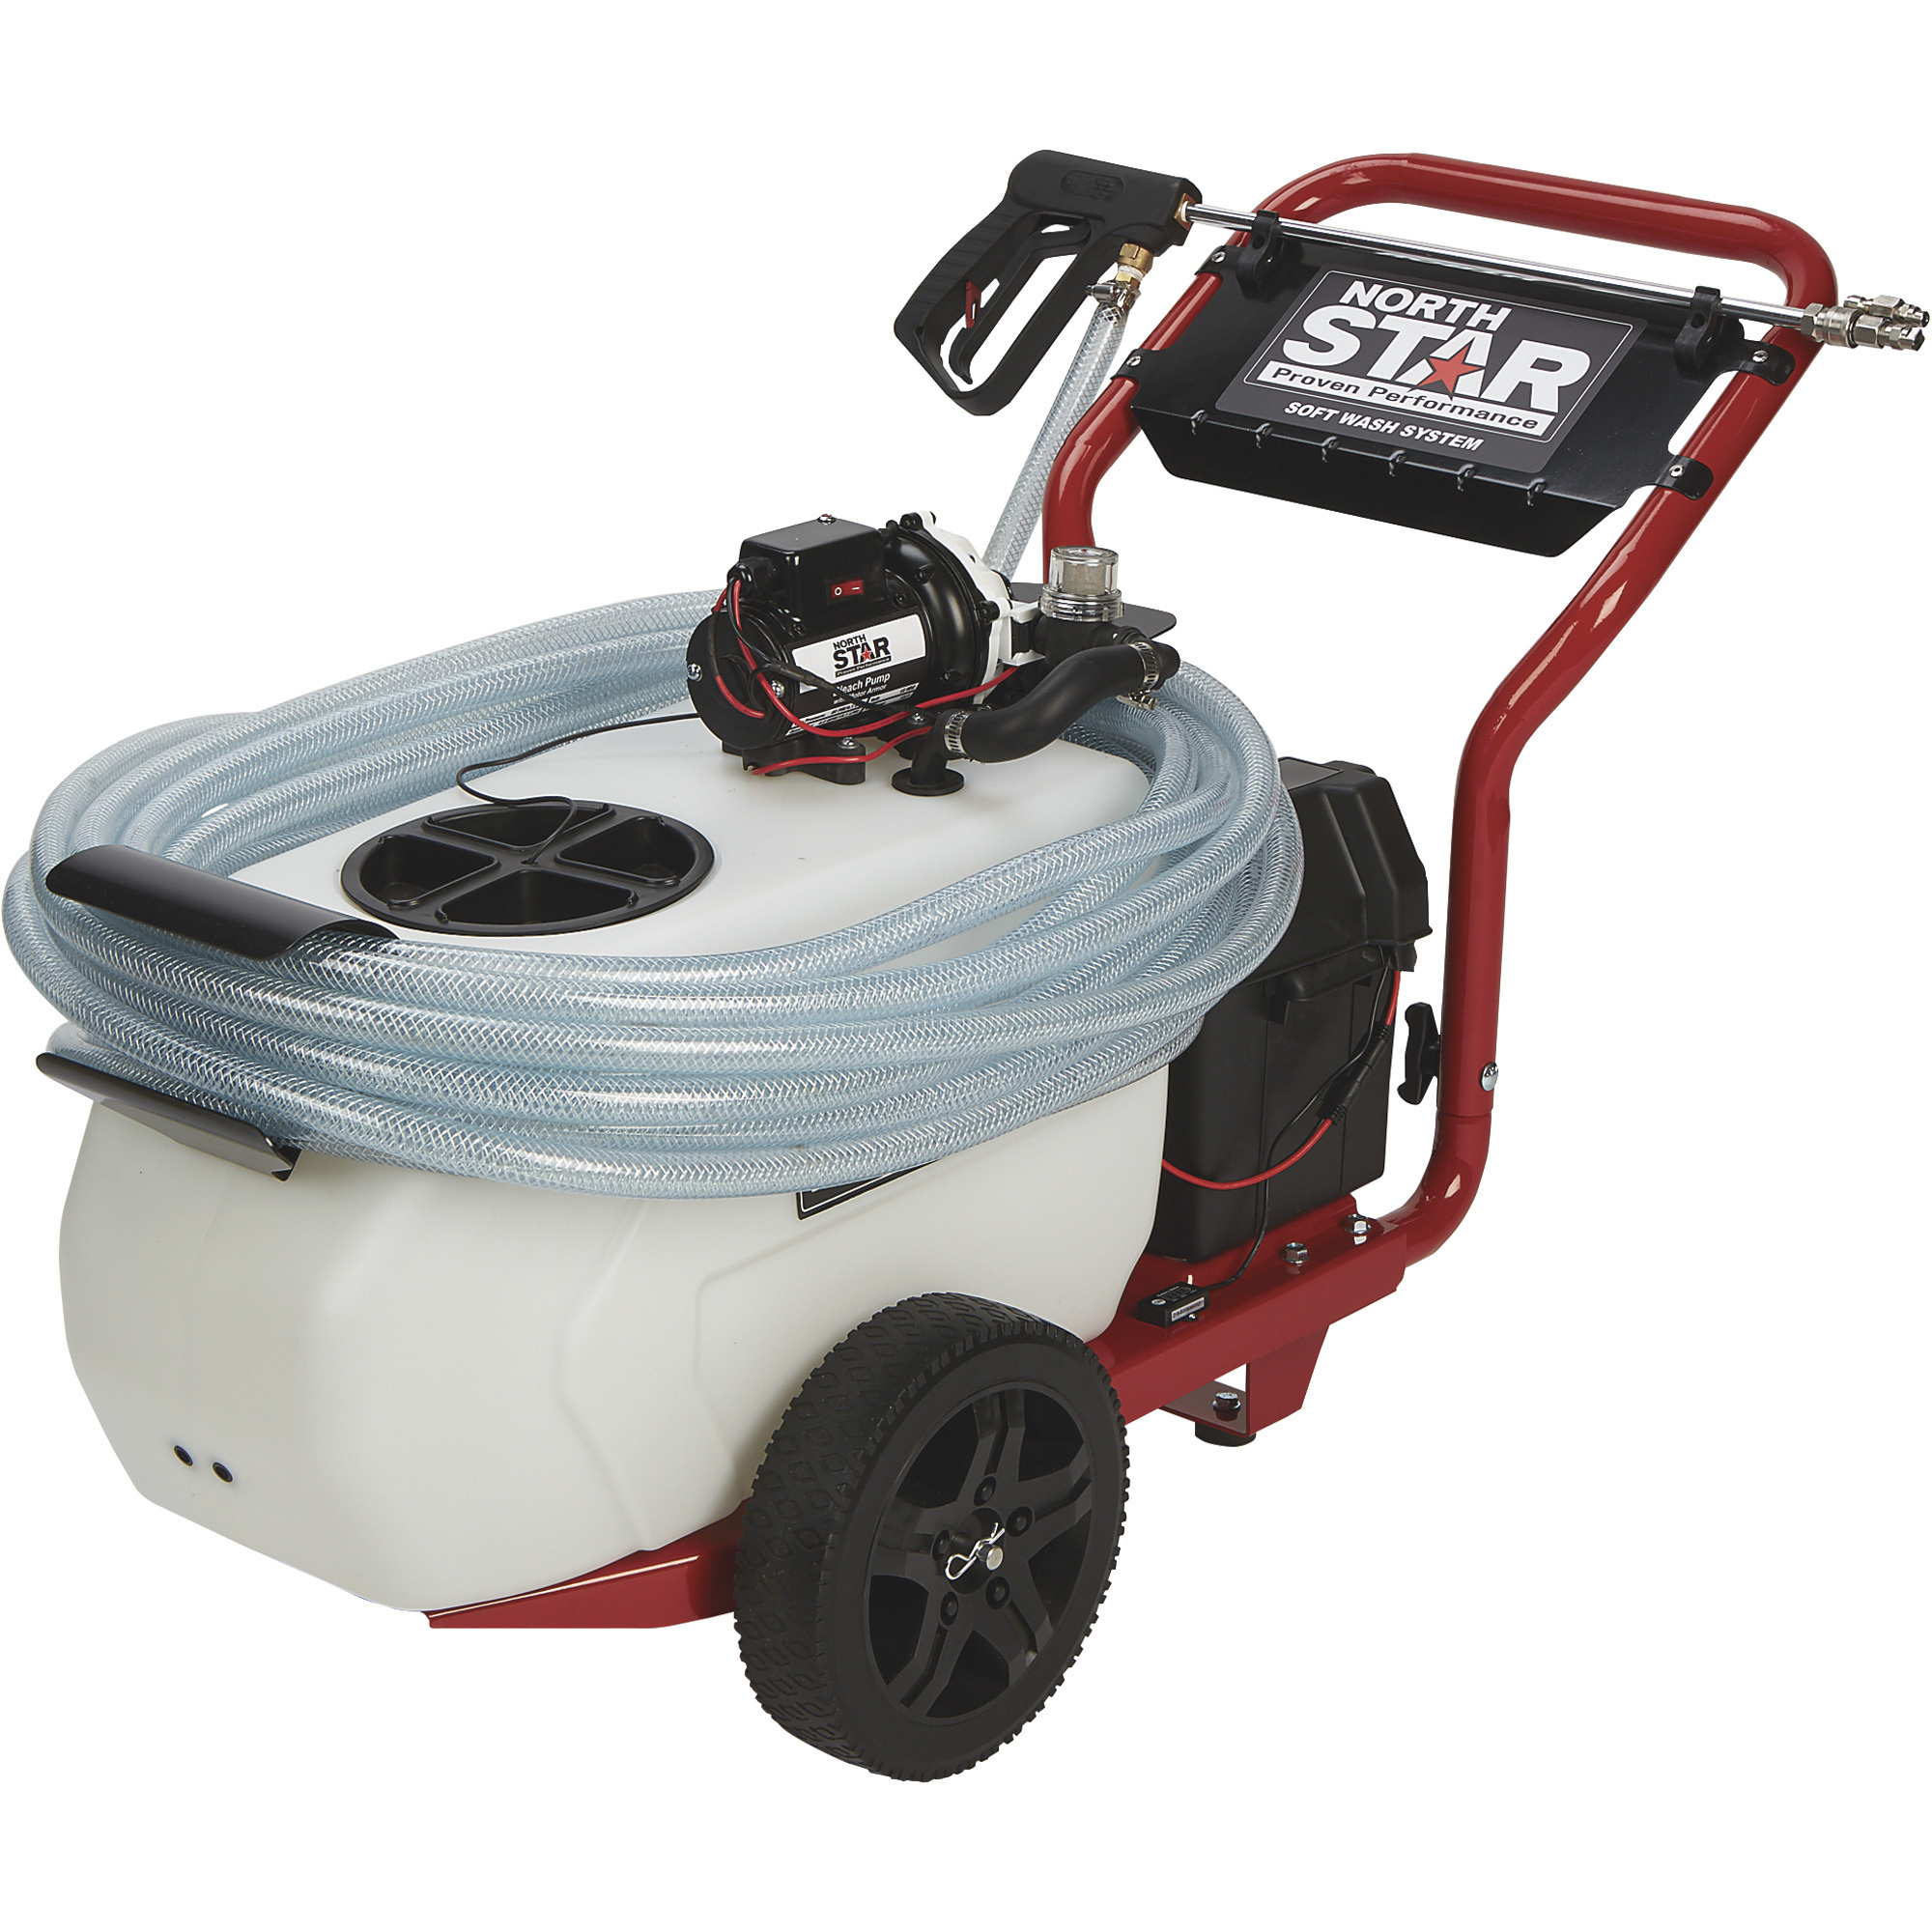 NorthStar Portable Soft Wash and Disinfectant System with 4.0 GPM Bleach Pump, Model #157140